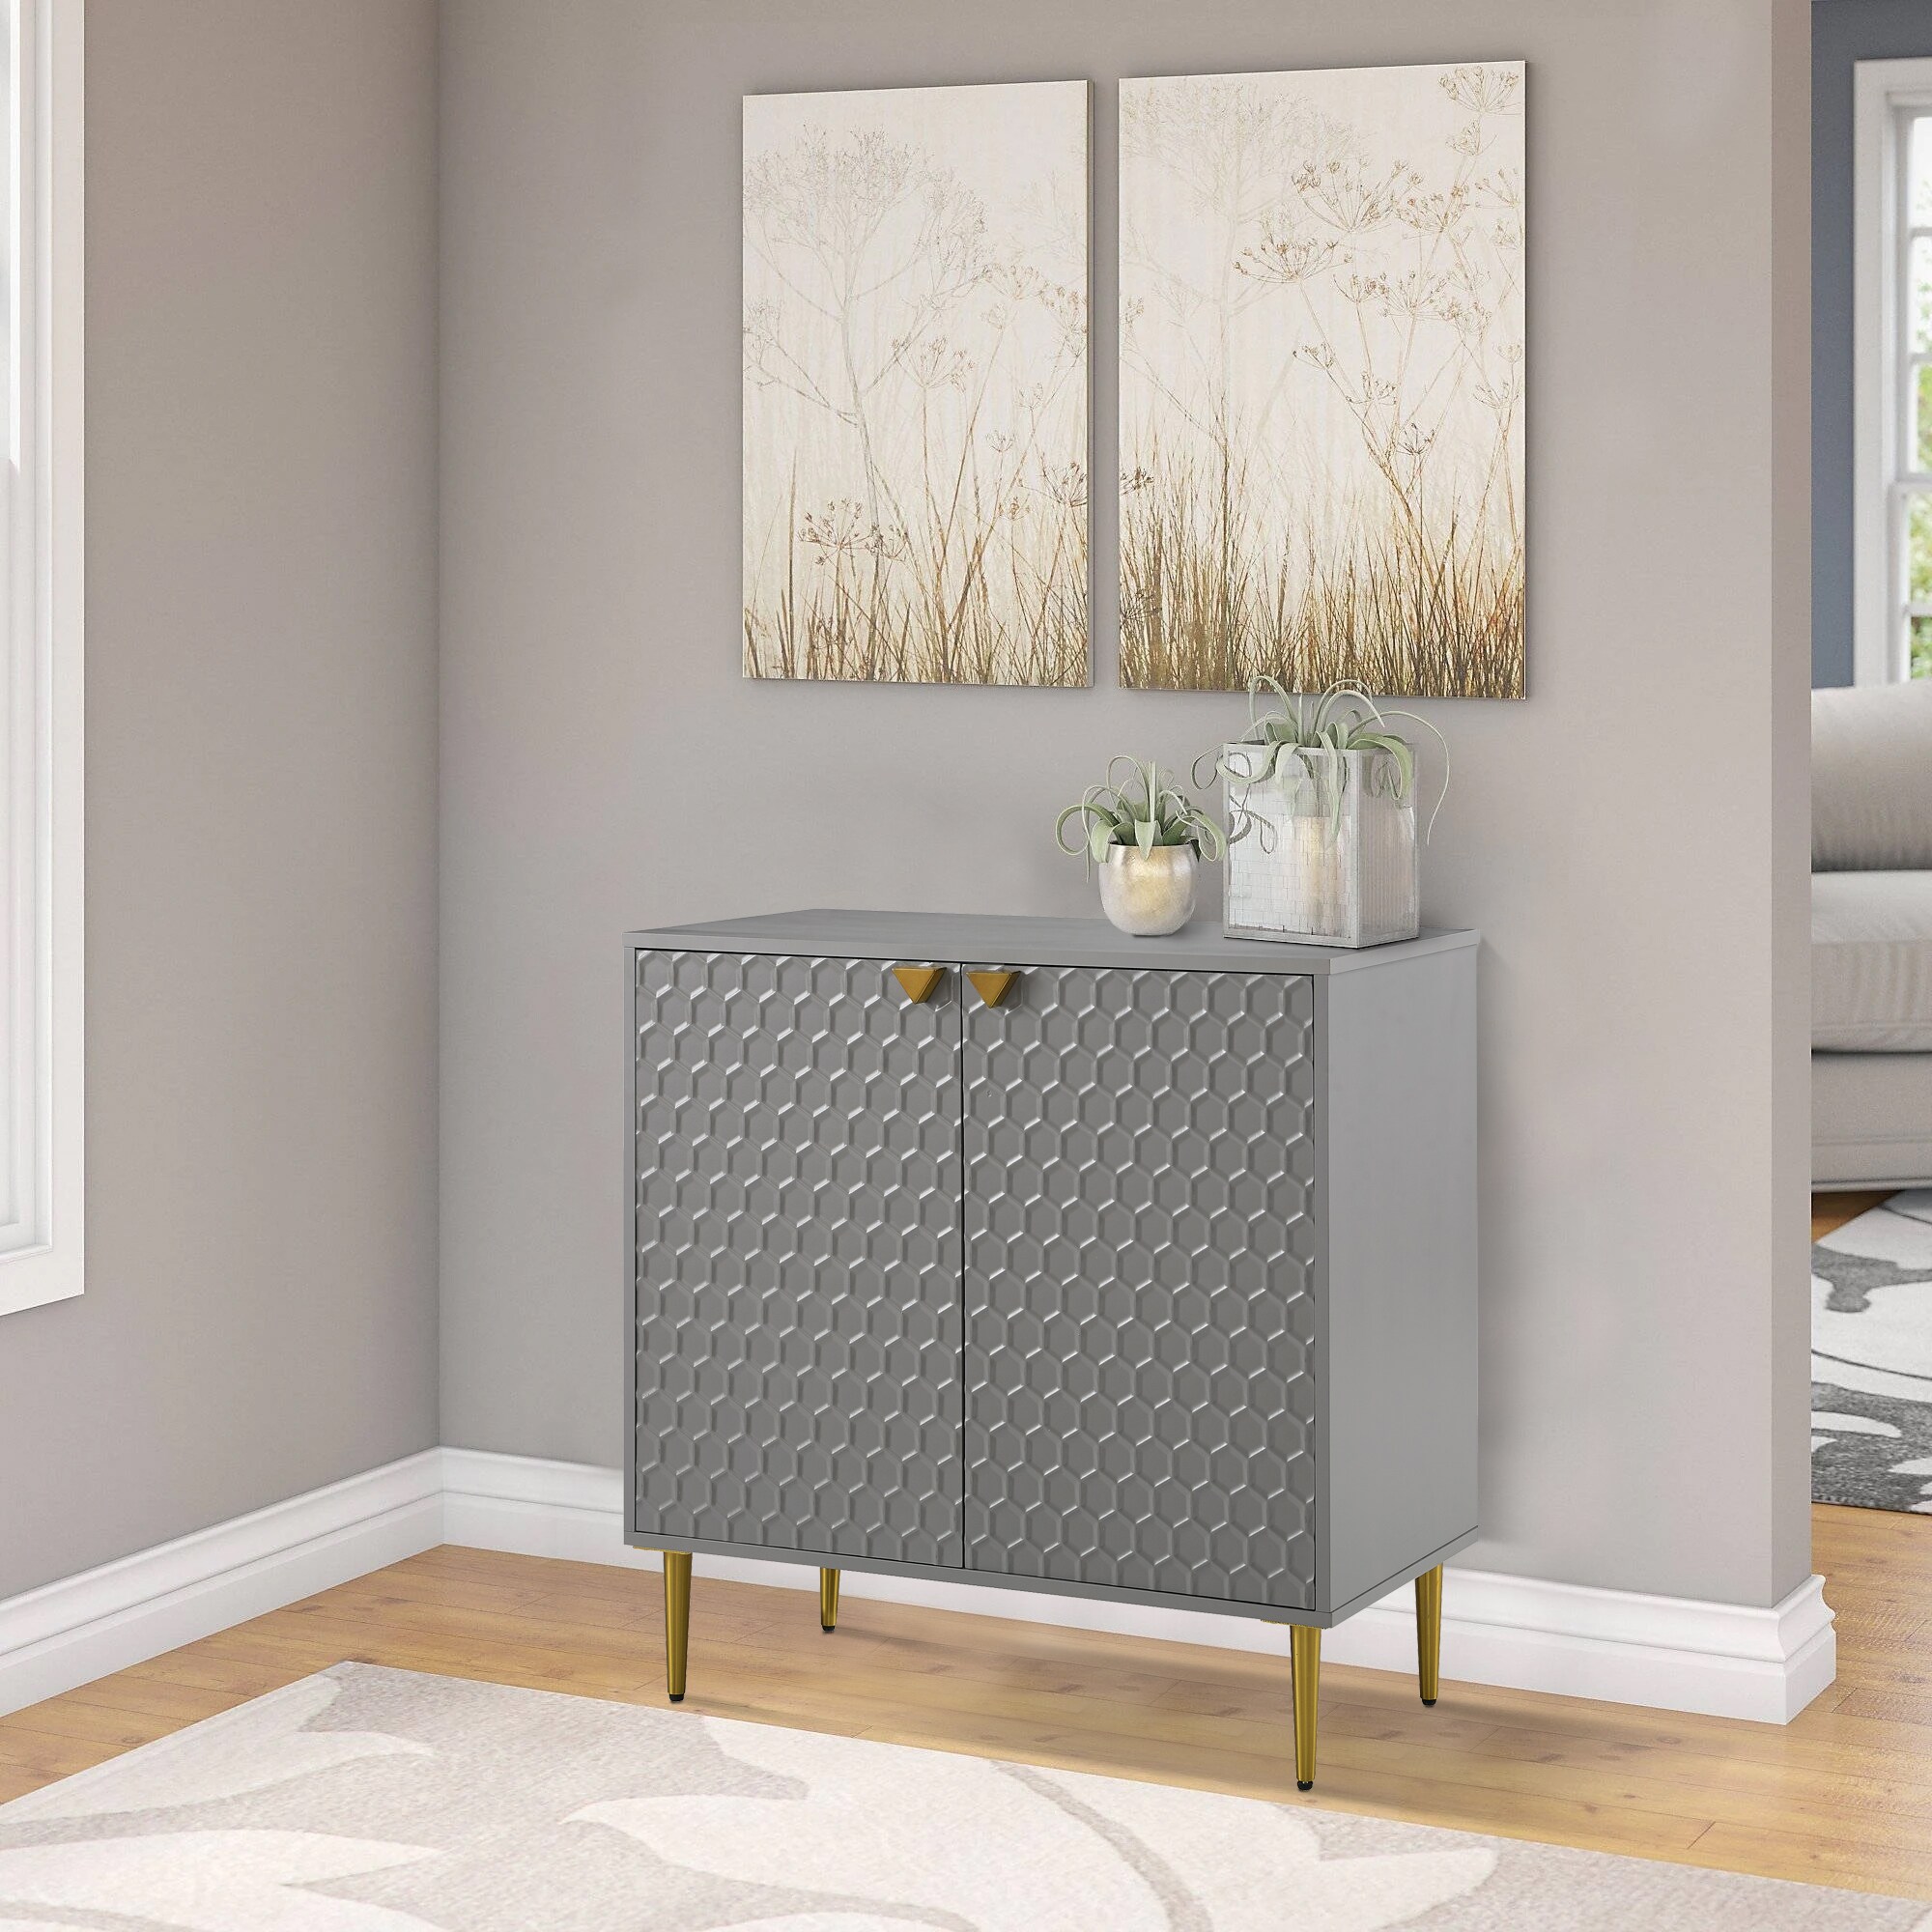 CASAINC Gray 2 Door Apothecary Accent Cabinet with Gold Accent Legs ...